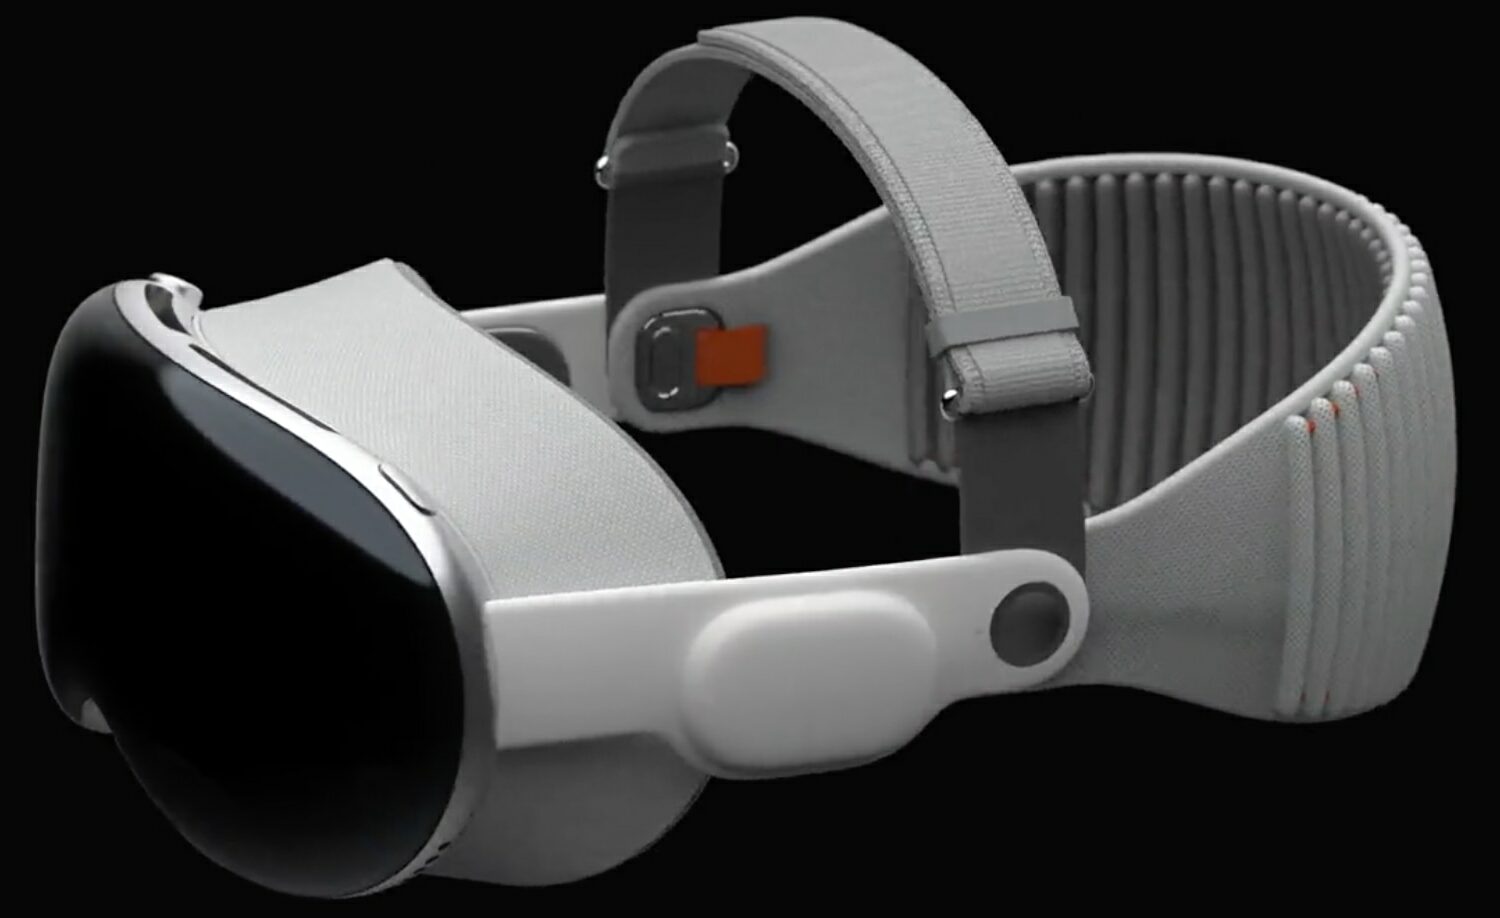 Rendering of Apple's Vision Pro headset with the optional top strap